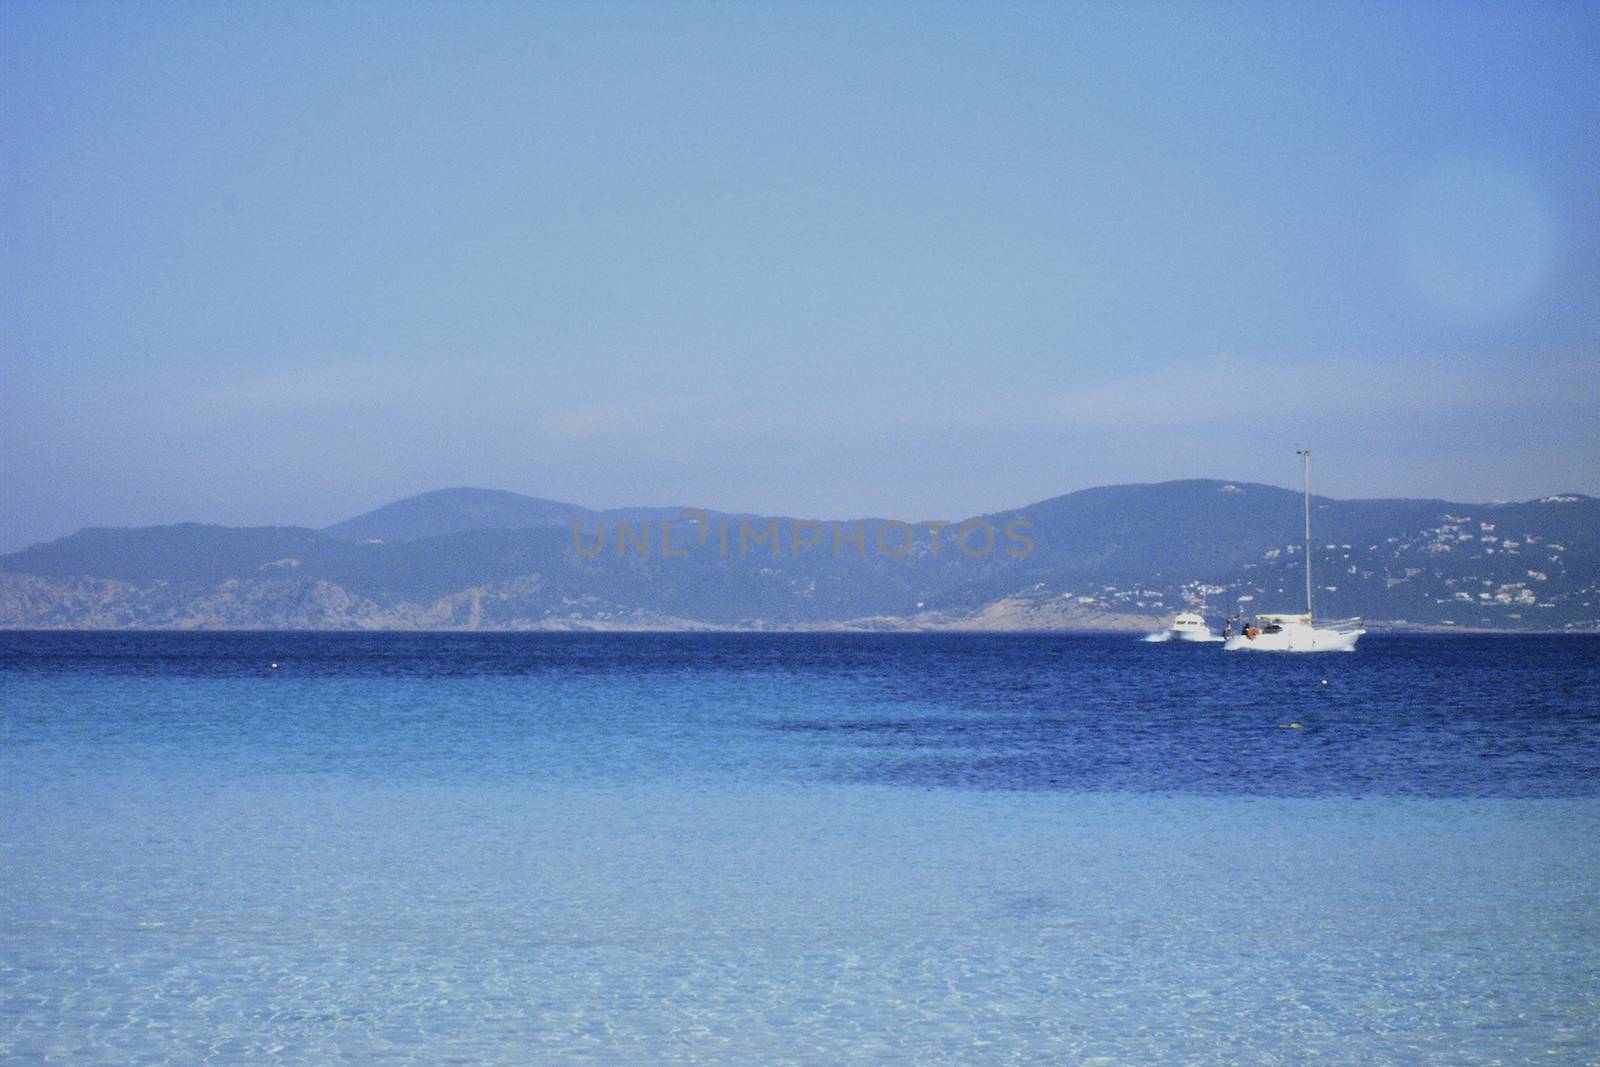 Deserted beach with turquoise waters, bright day, Mountains in the background and bright blue day, two boats sailing